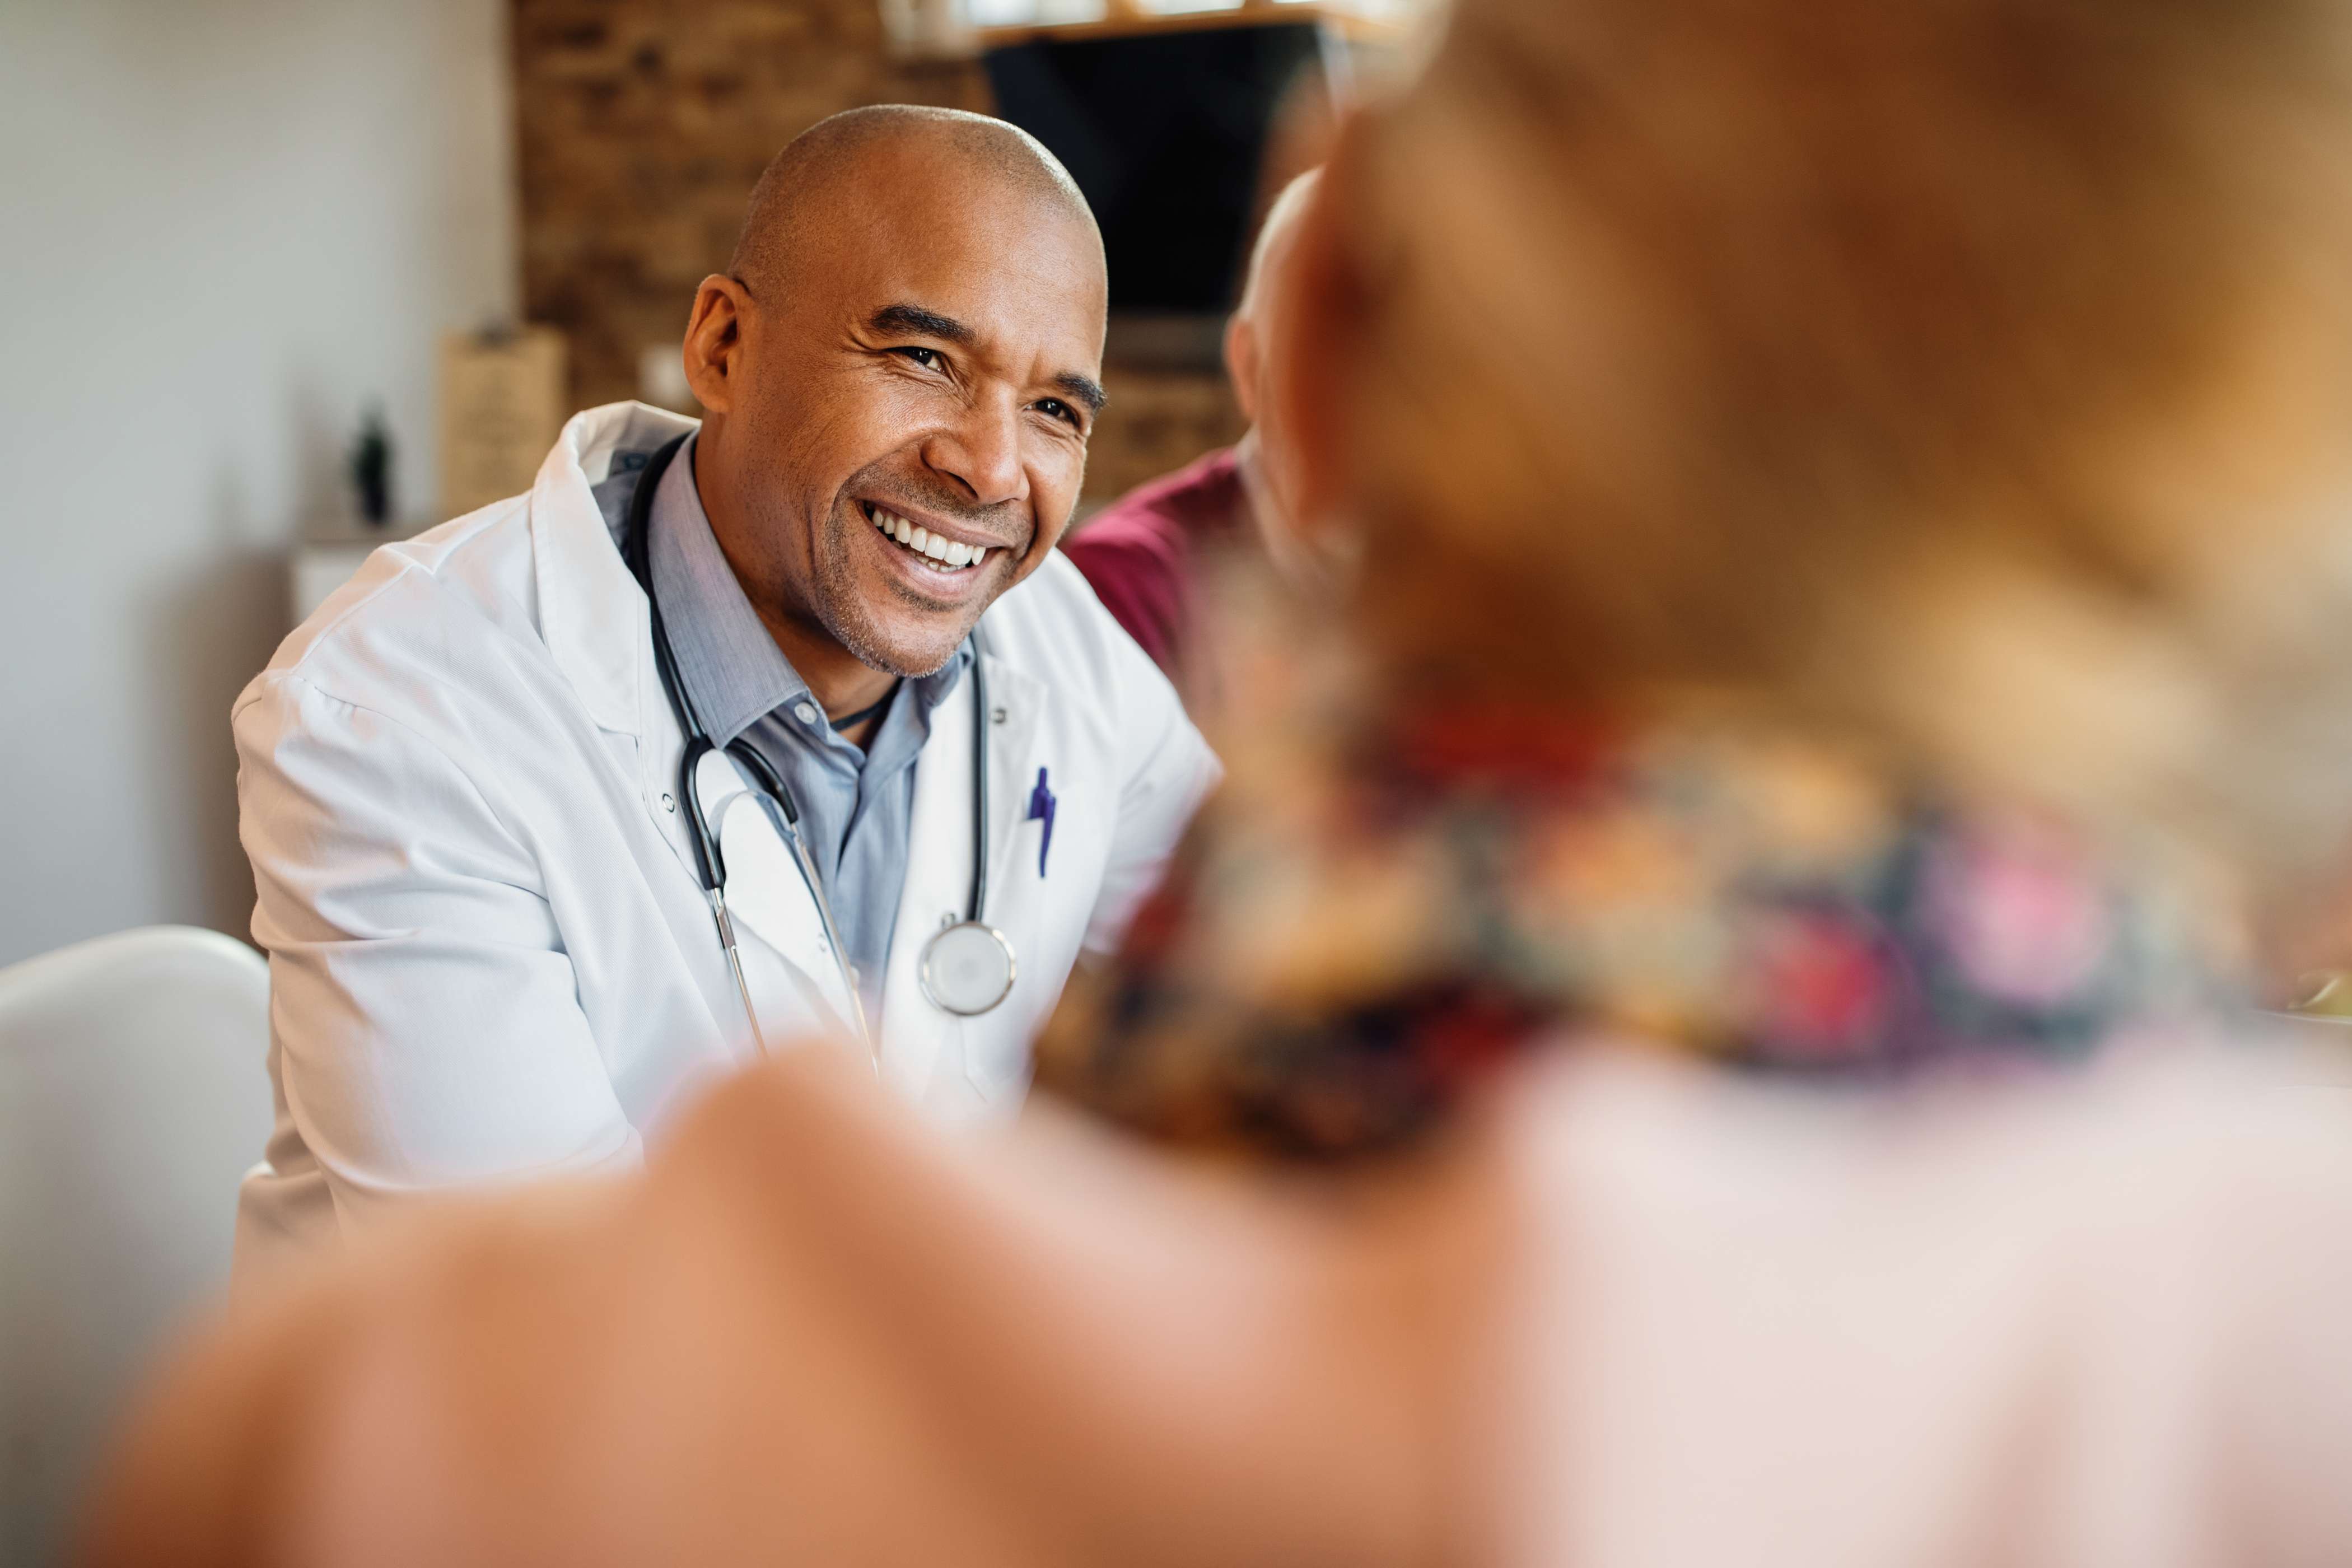 Our Private GP clinic is in easy reach from High Wycombe, Marlow, Oxford and Thame, being just 1 minute off Junction 5 of the M40. We offer an extensive range of vaccinations and travel services.